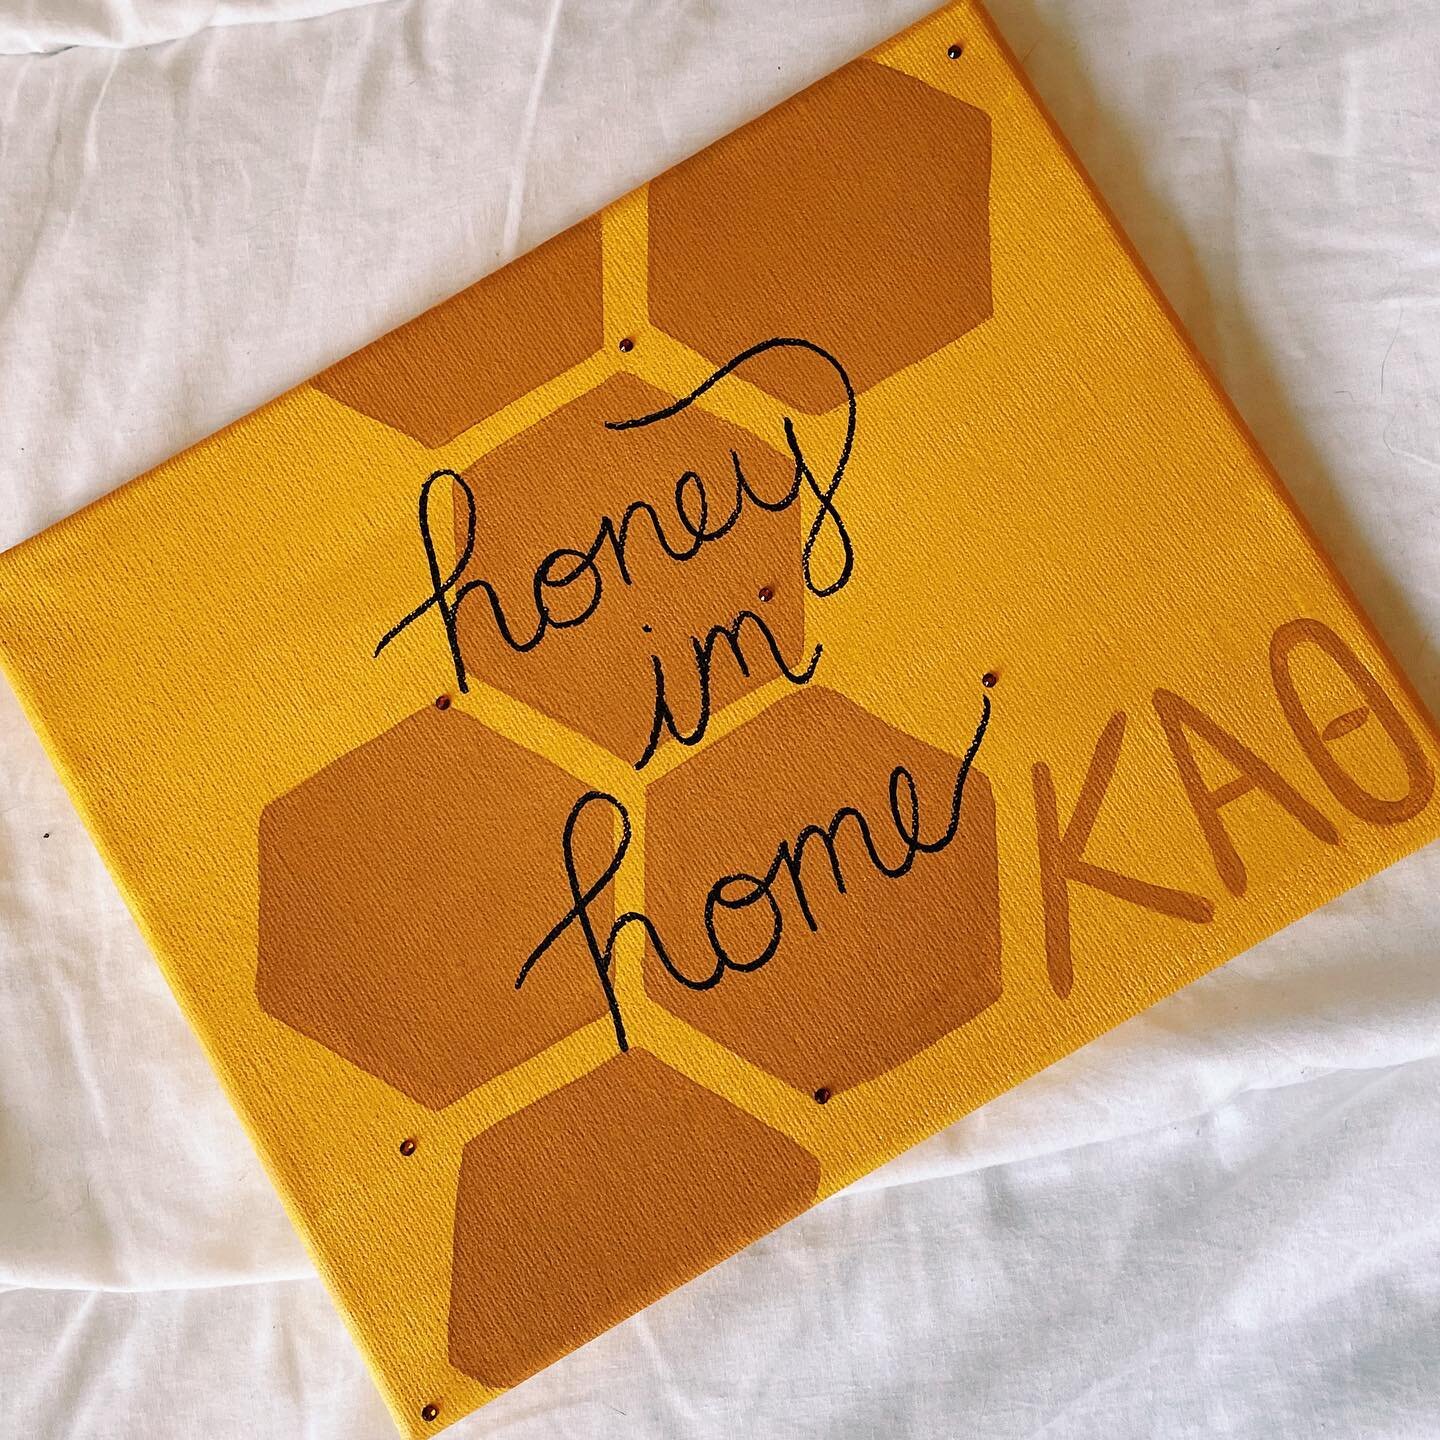 Custom made canvas 🍯 by Ms. McKenzie 

Honey find your home at Artsy Partsy! You can make your own custom canvas or create one of our designs at Family Paint Night

Family Paint Night is every Friday from 4:00-8:00pm. Reserve your time slot on our w